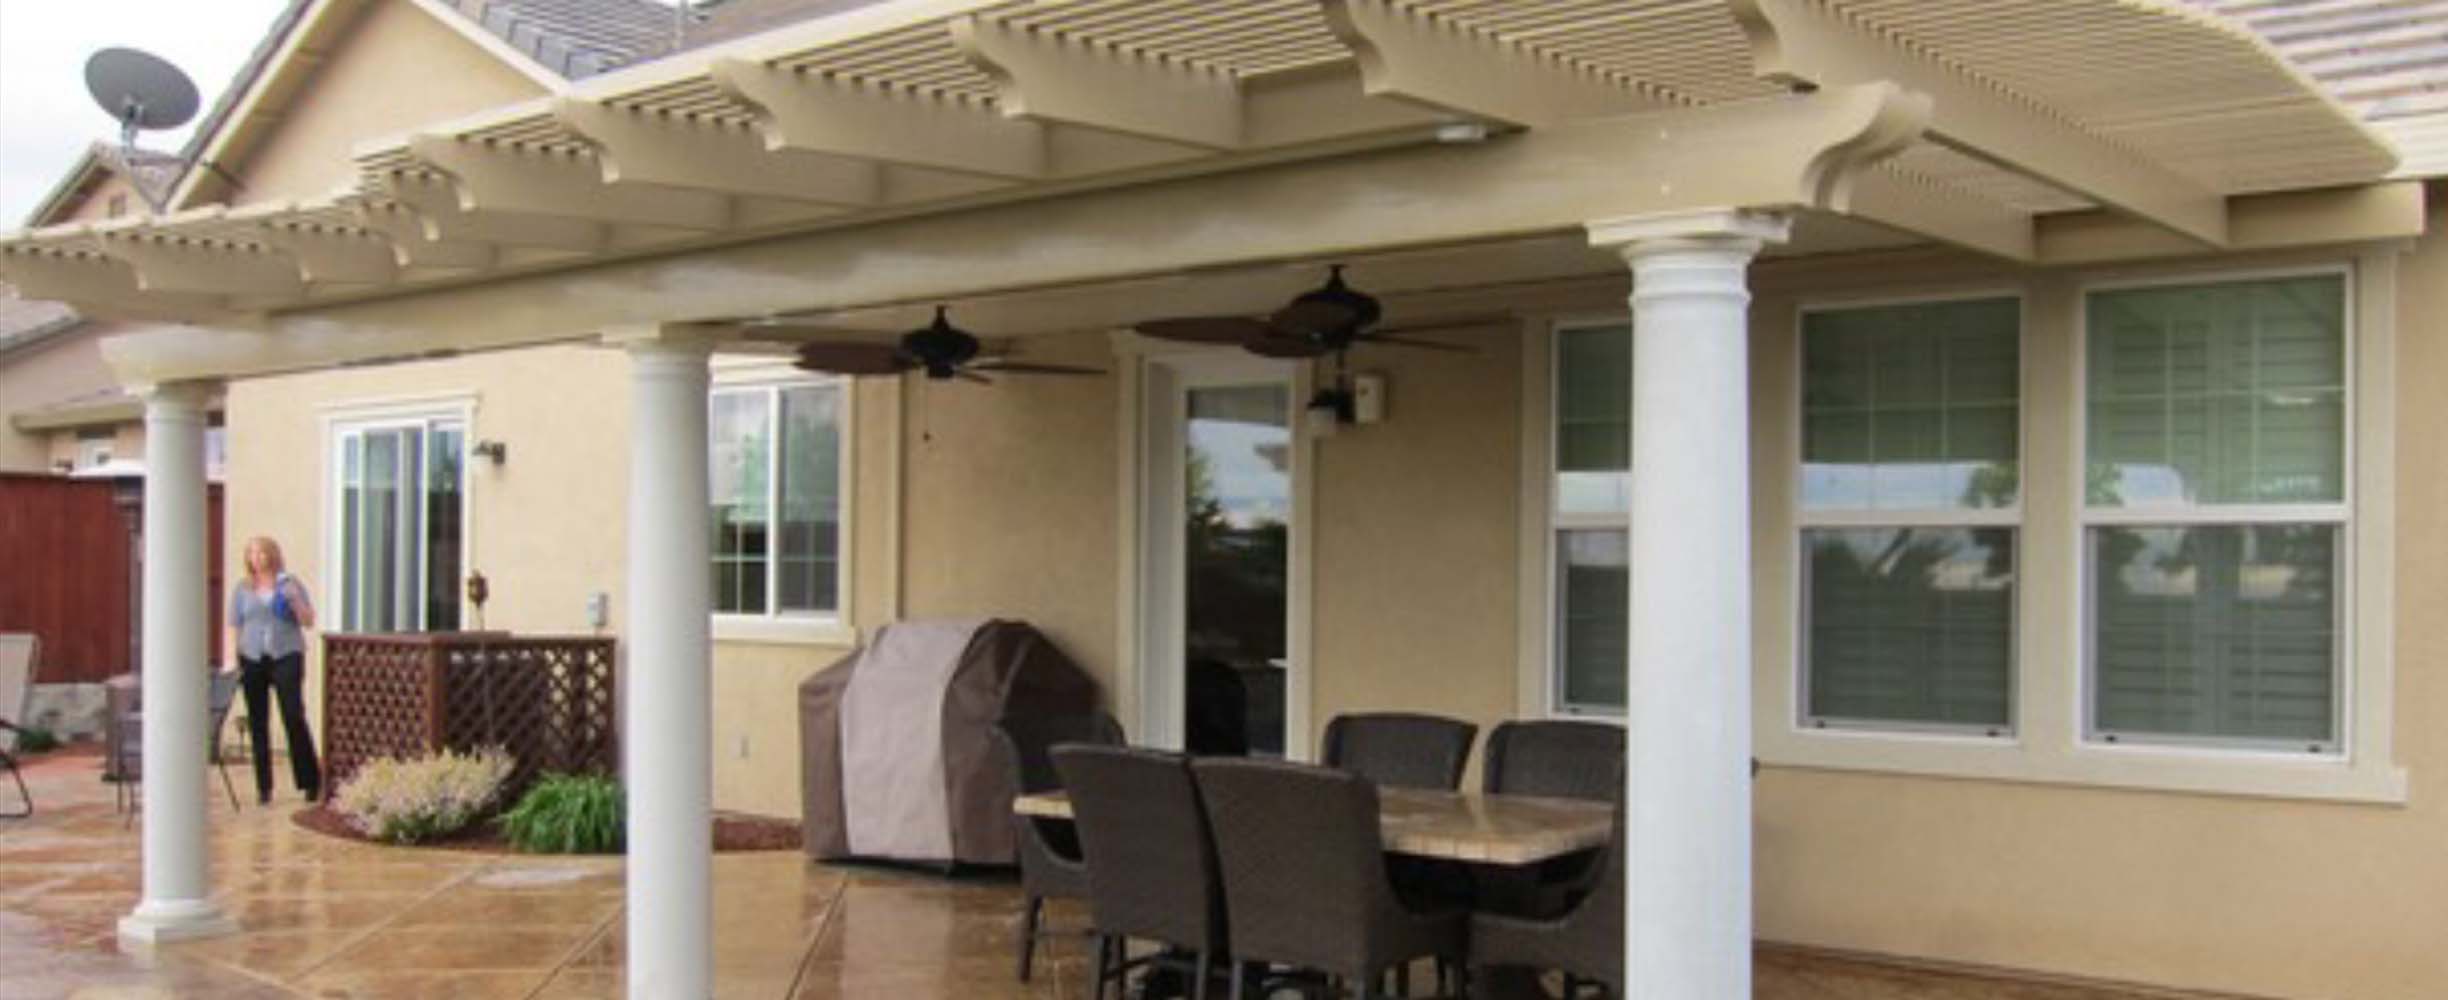 Beautiful Pergol, or pergola, adding functionality to a patio or garden in a beautiful and classy way.